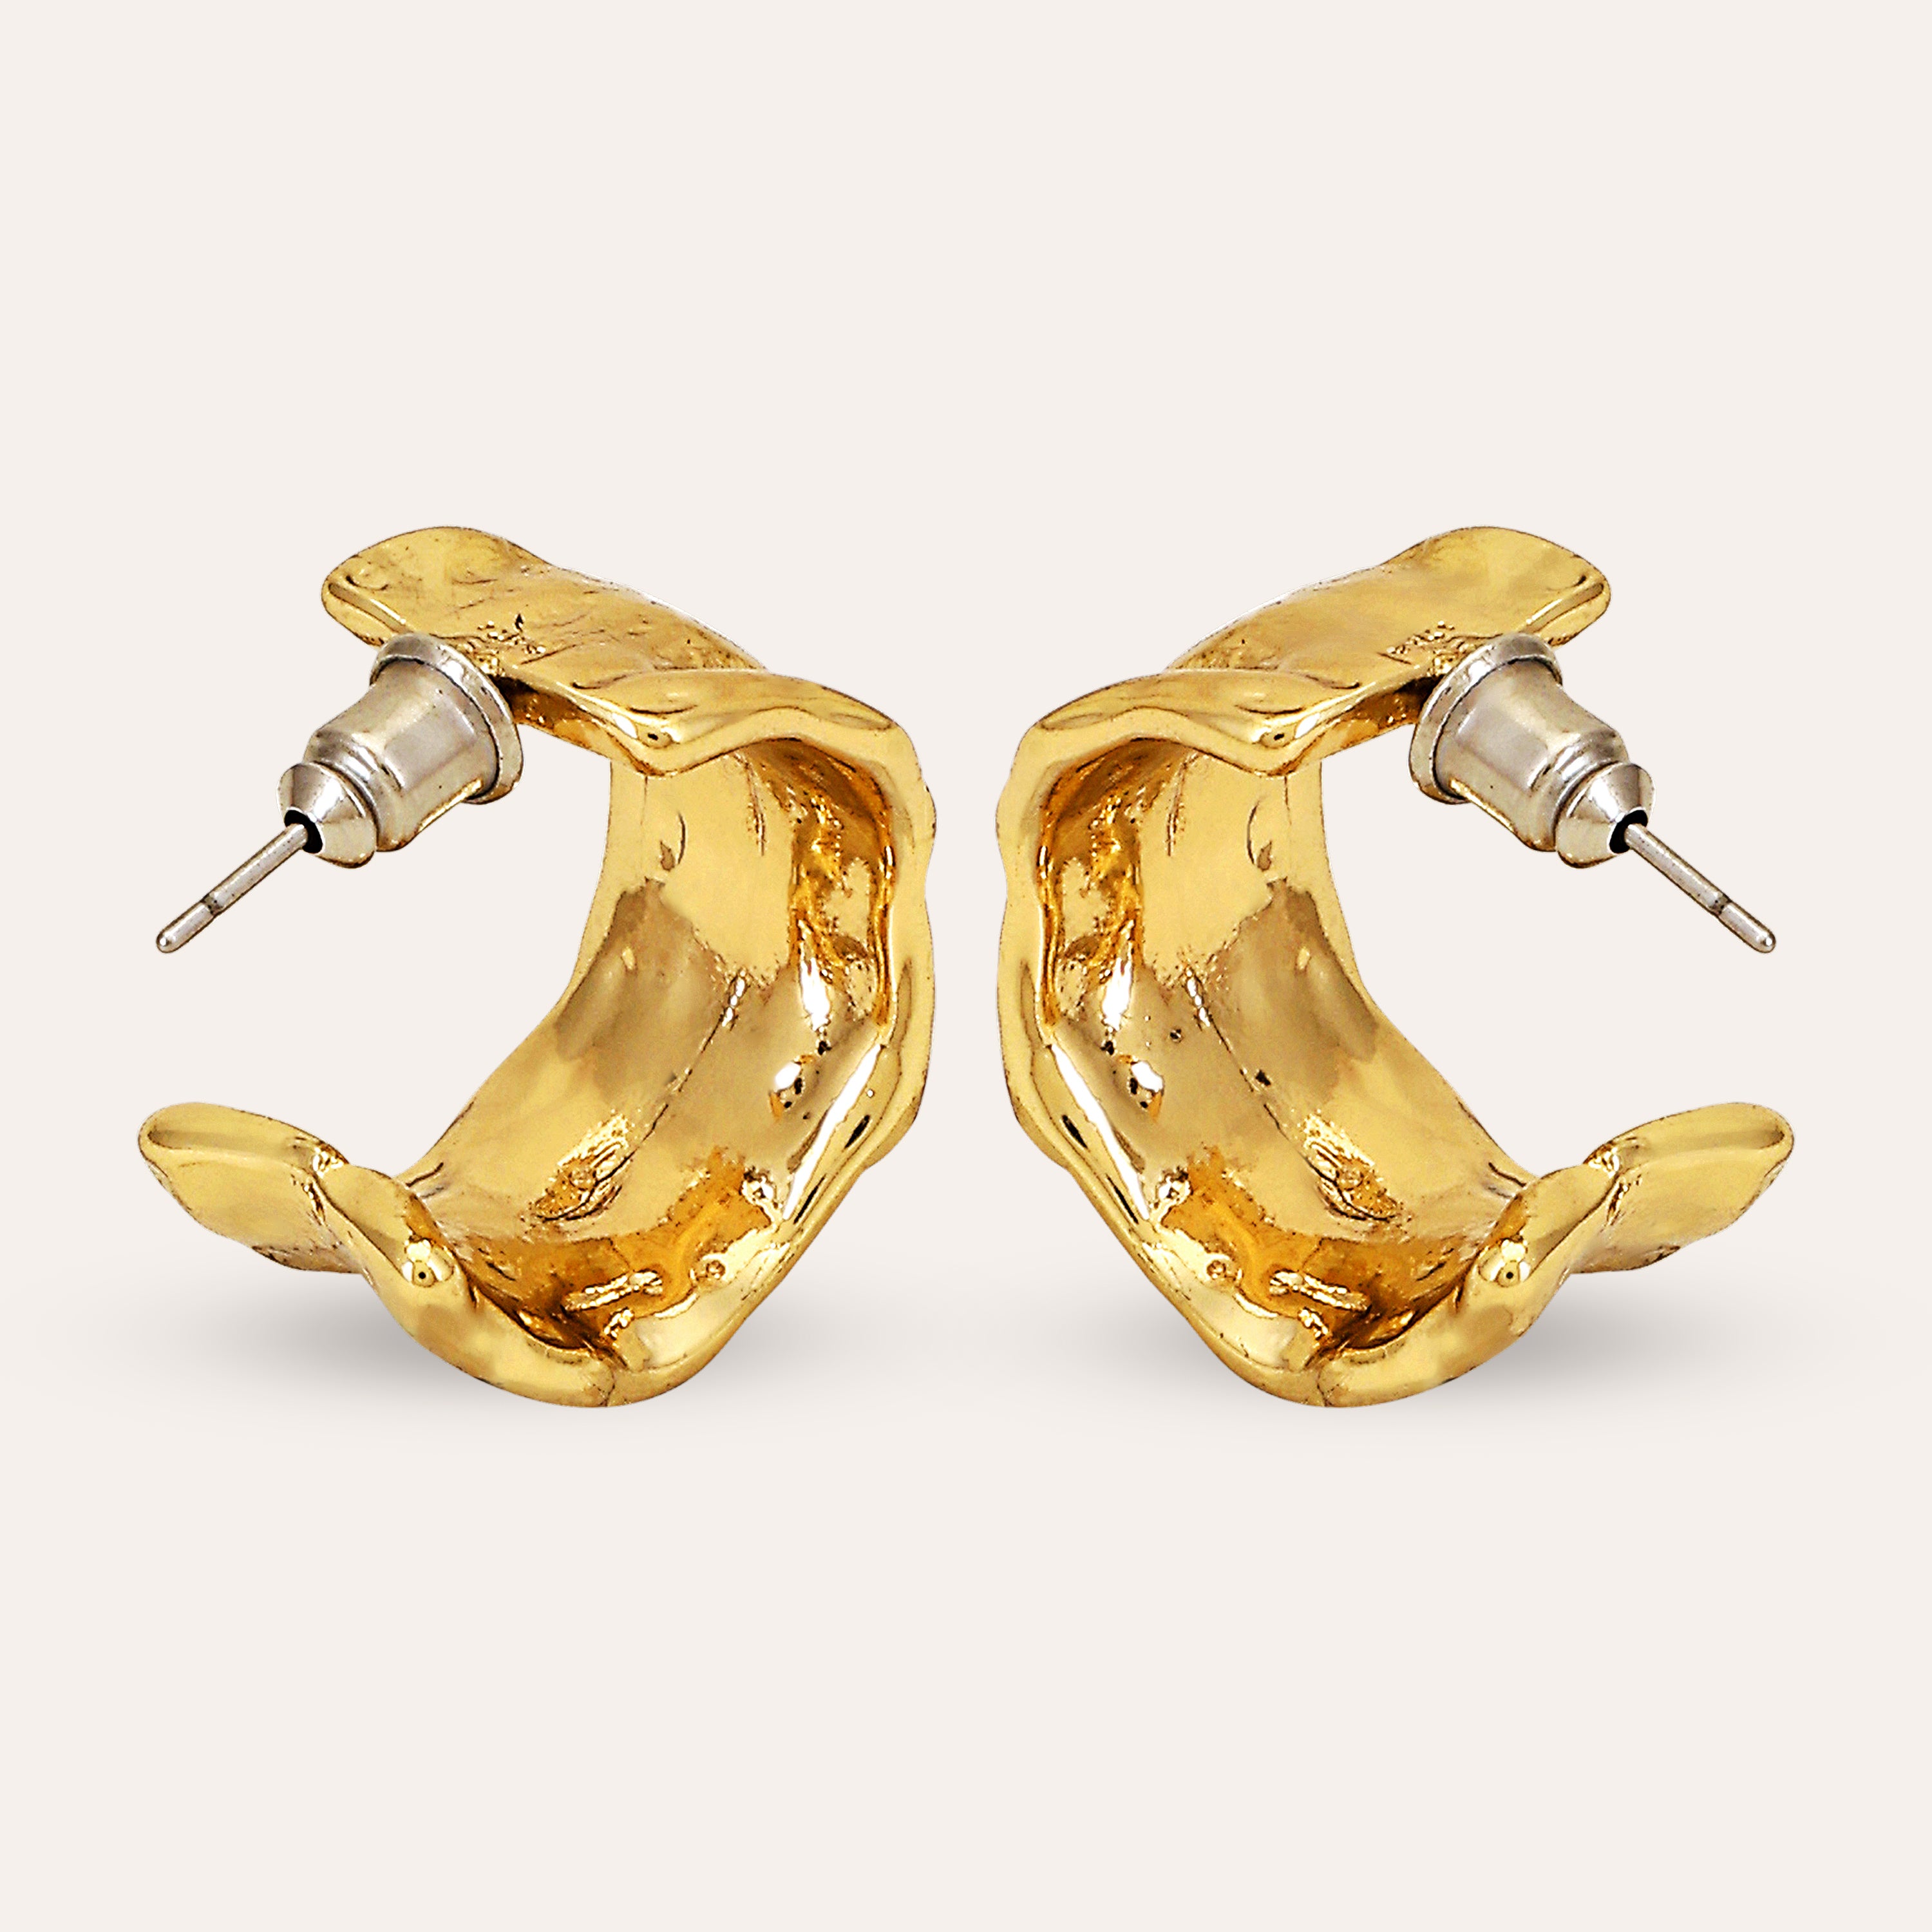 TFC Italian Luxury Gold Plated Hoop Earrings- Discover daily wear gold earrings including stud earrings, hoop earrings, and pearl earrings, perfect as earrings for women and earrings for girls.Find the cheapest fashion jewellery which is anti-tarnis​h only at The Fun company.